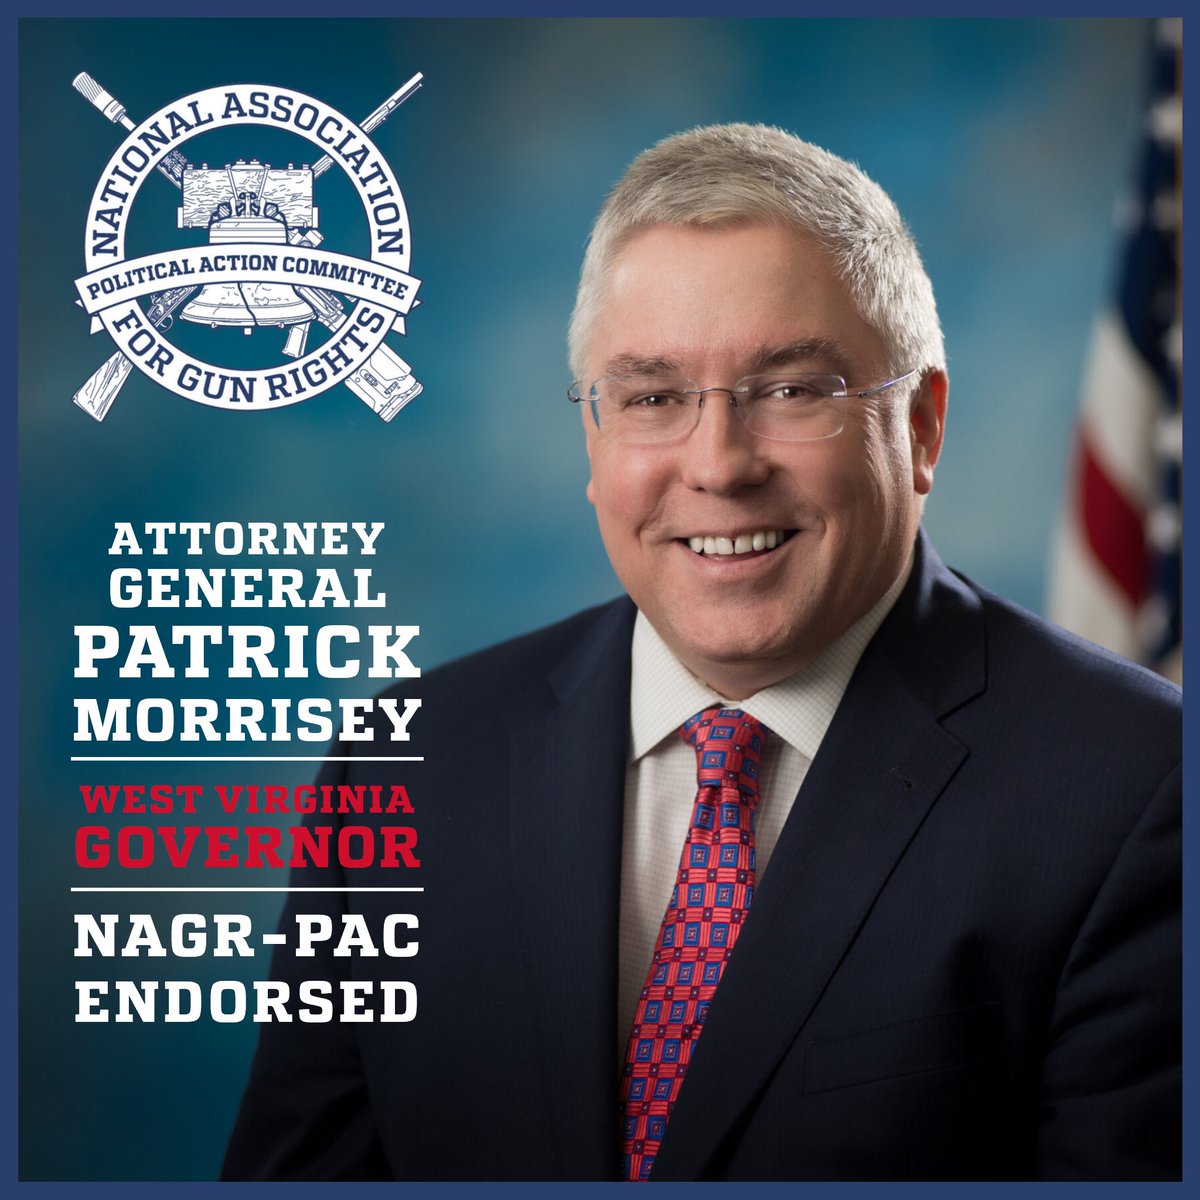 West Virginia needs a leader who stands firm on the Second Amendment. @MorriseyWV has a proven track record of defending our gun rights as Attorney General. By returning his NAGR Survey 100% he has pledged that as Governor, he'll ensure our right to bear arms remains protected.